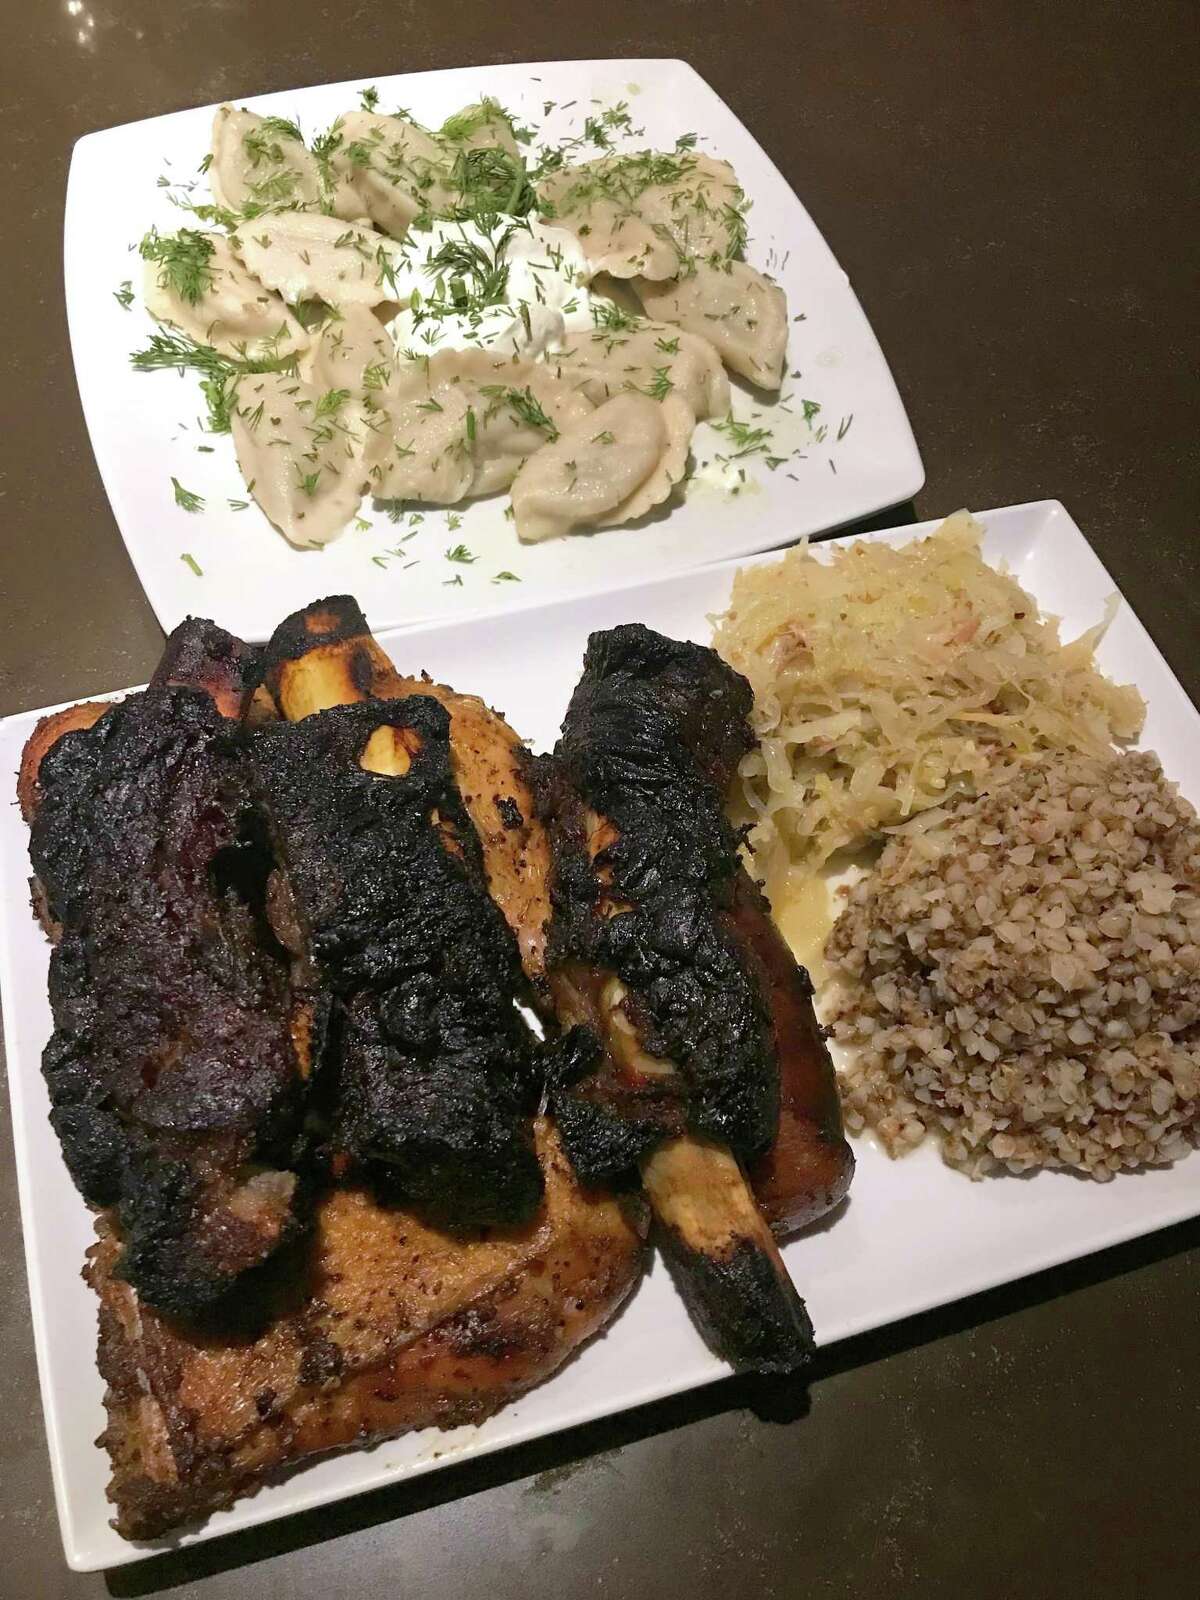 A barbecue plate from Web House Café & Bar included three ribs, two chicken leg quarters, a smoked sausage, and sides of sauerkraut and buckwheat.  In the back is an order of potato and dill vareniki.